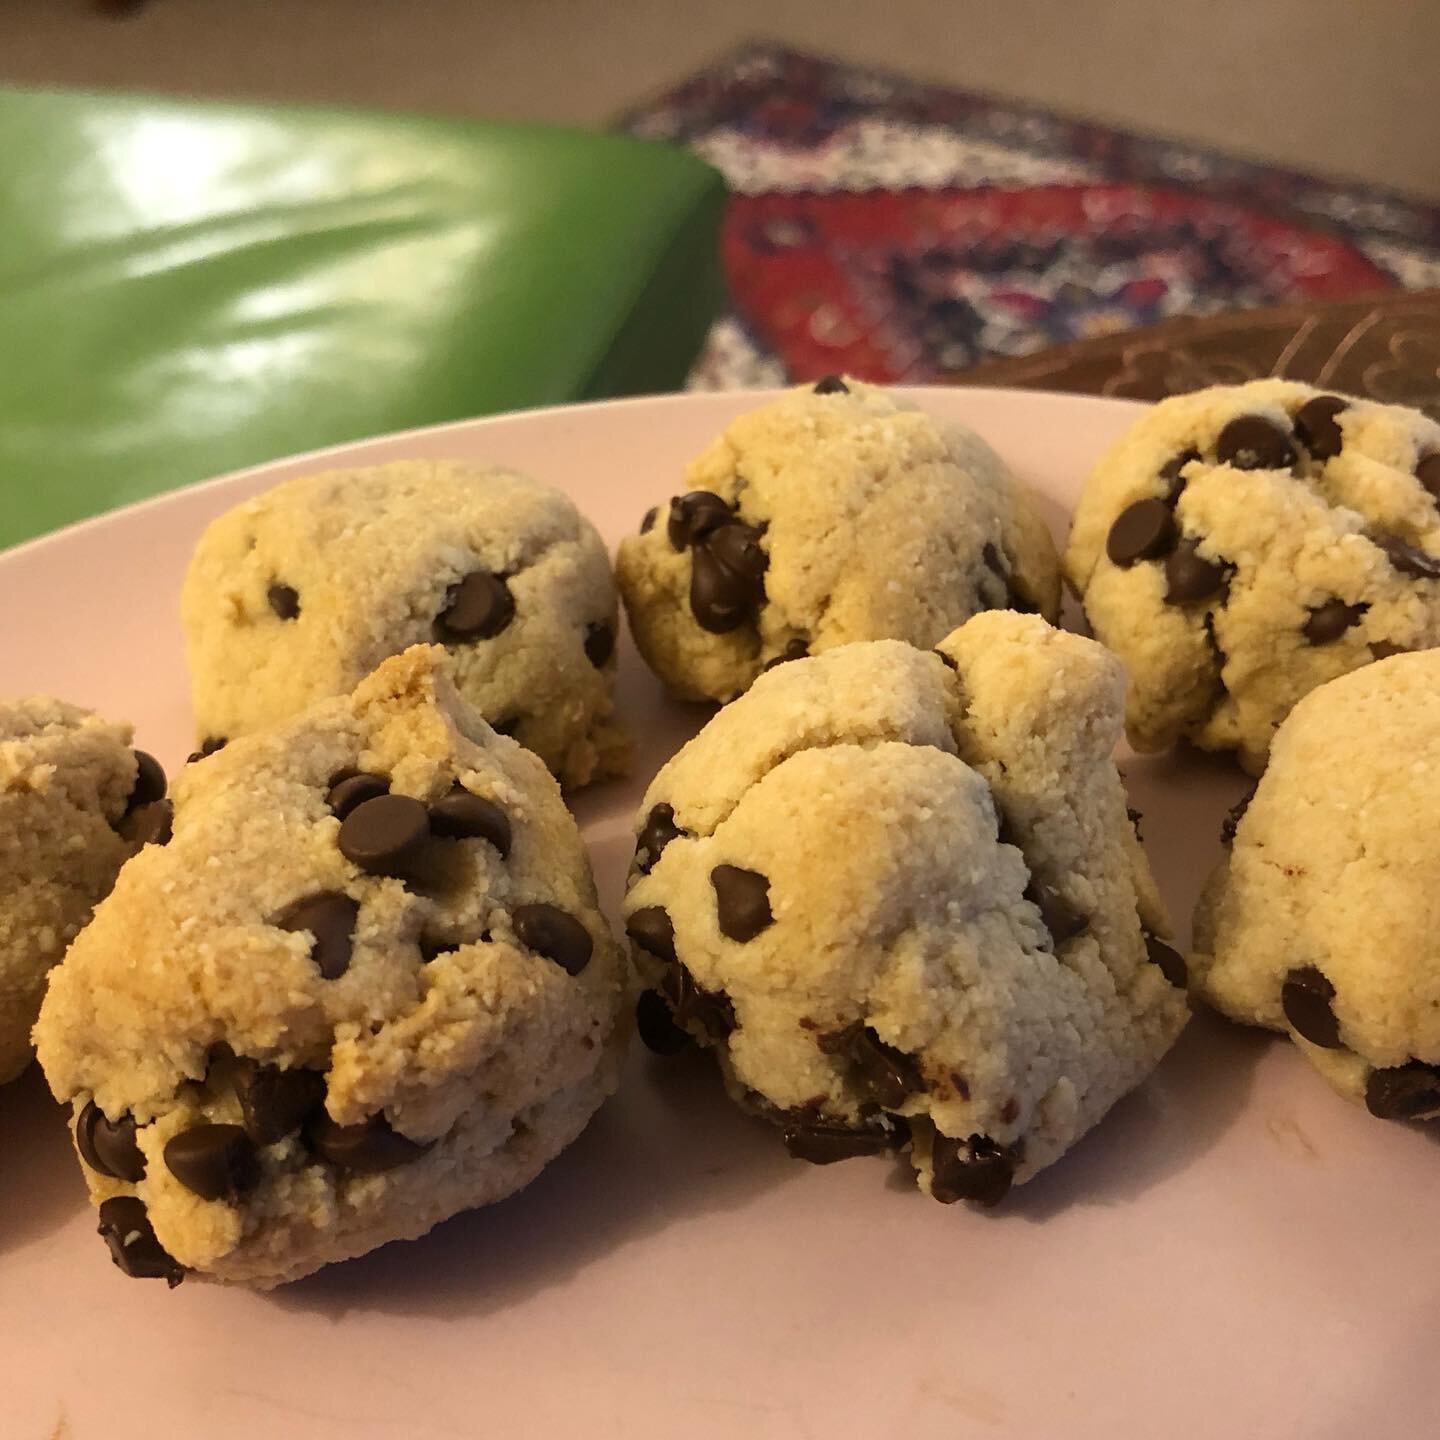 Eating your feelings away has never been healthier with these bad boys! My home made cookies will make you fall in love and out of love; as you eat your feelings away!👍🏼😀Ground almonds, dairy free chocolate chips, coconut oil, sweetener, apple cid